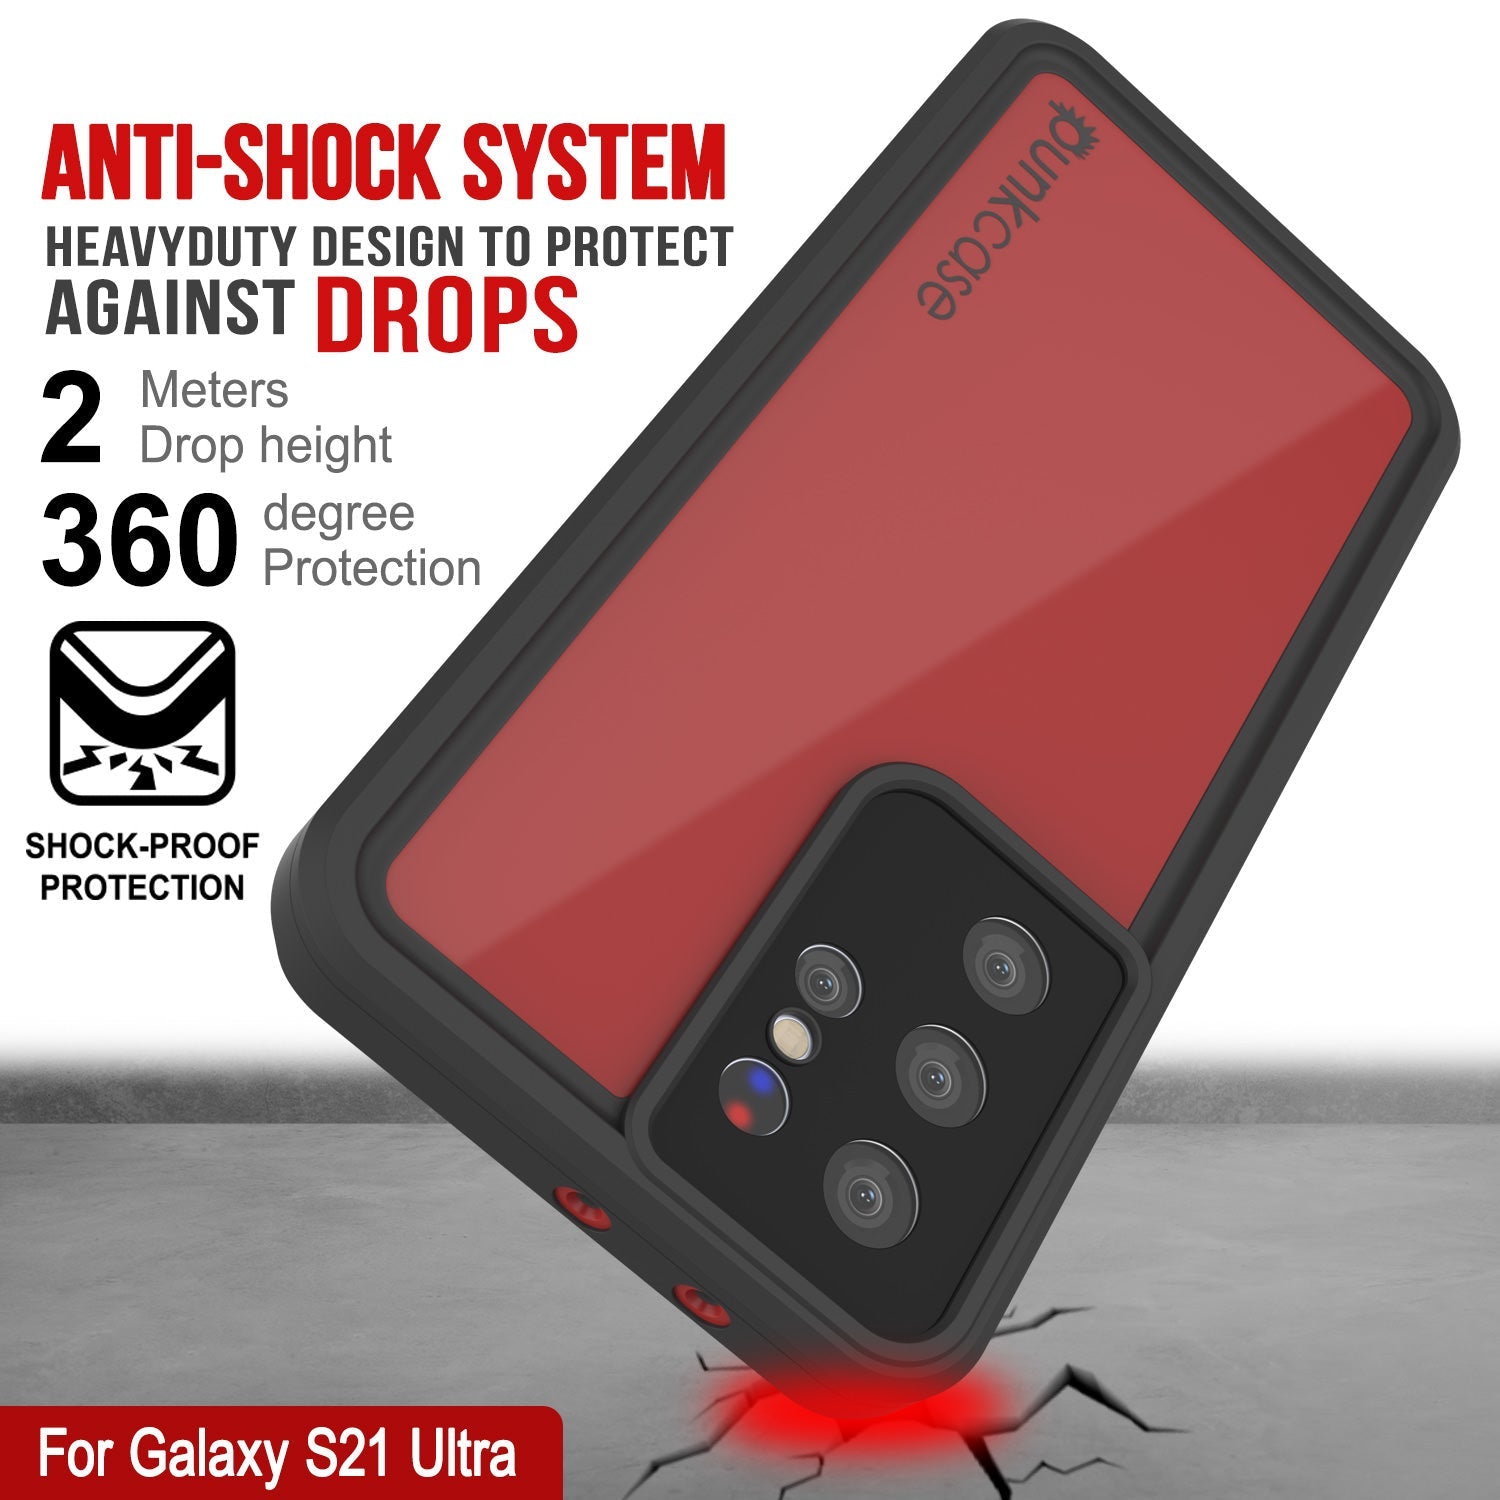 Galaxy S22 Ultra Shockproof Armor Metal Case – Redpepper Cases